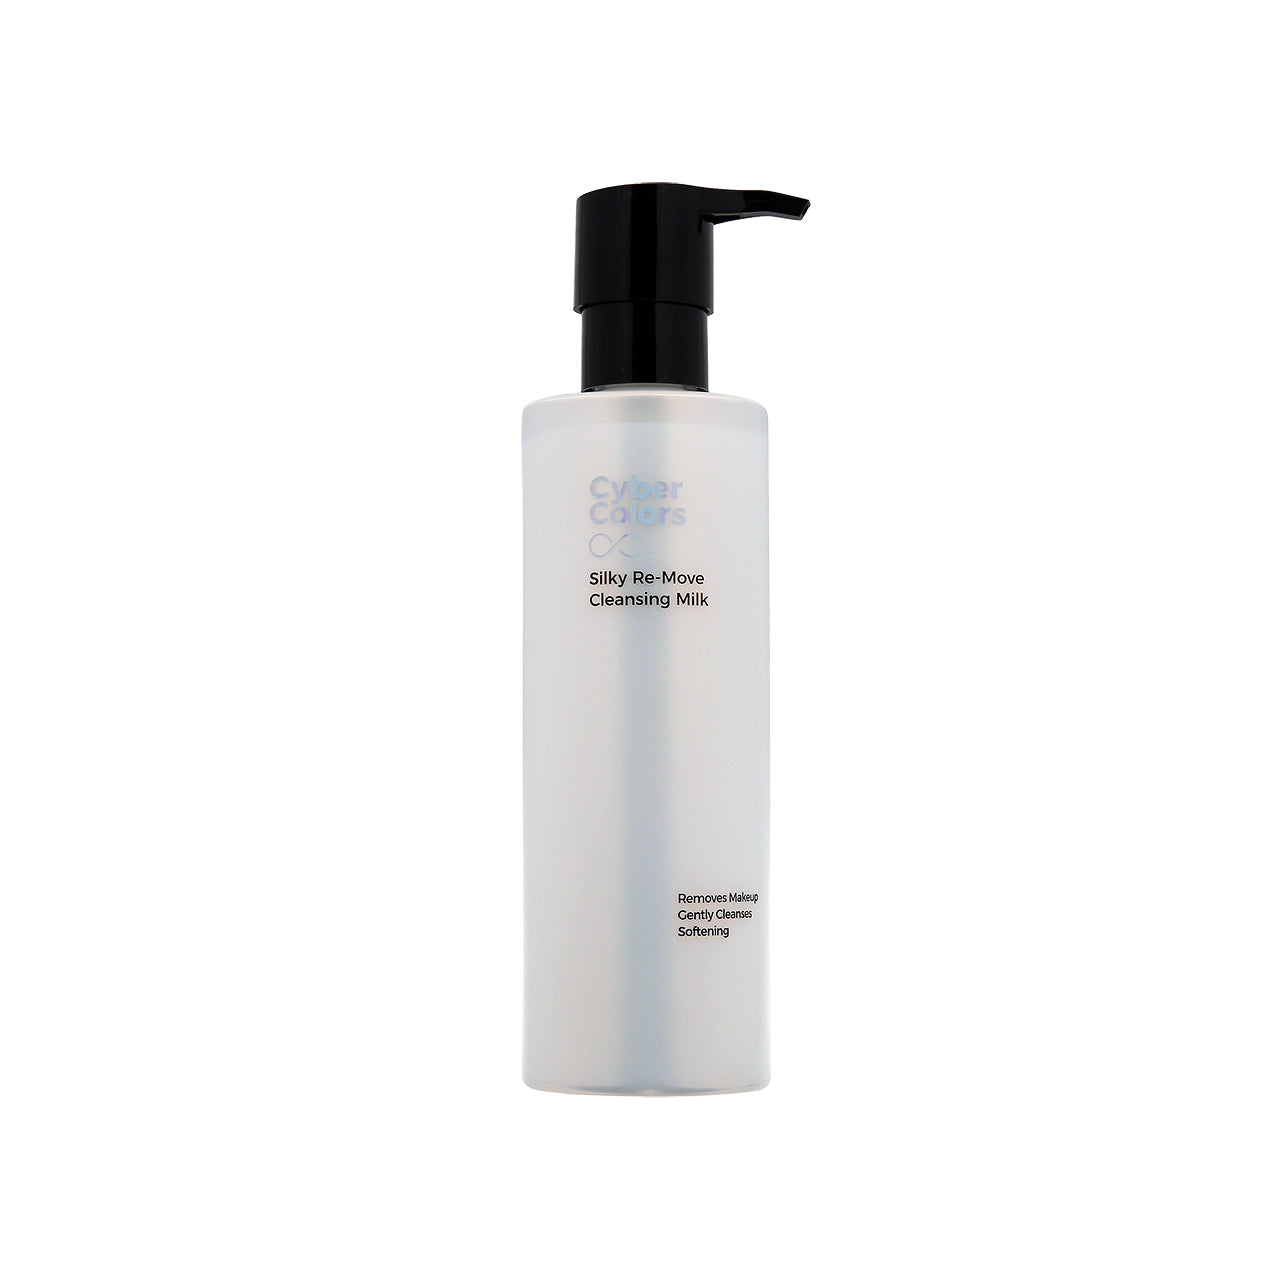 Cyber Colors Silky Re-Move Cleansing Milk 240ml | Sasa Global eShop